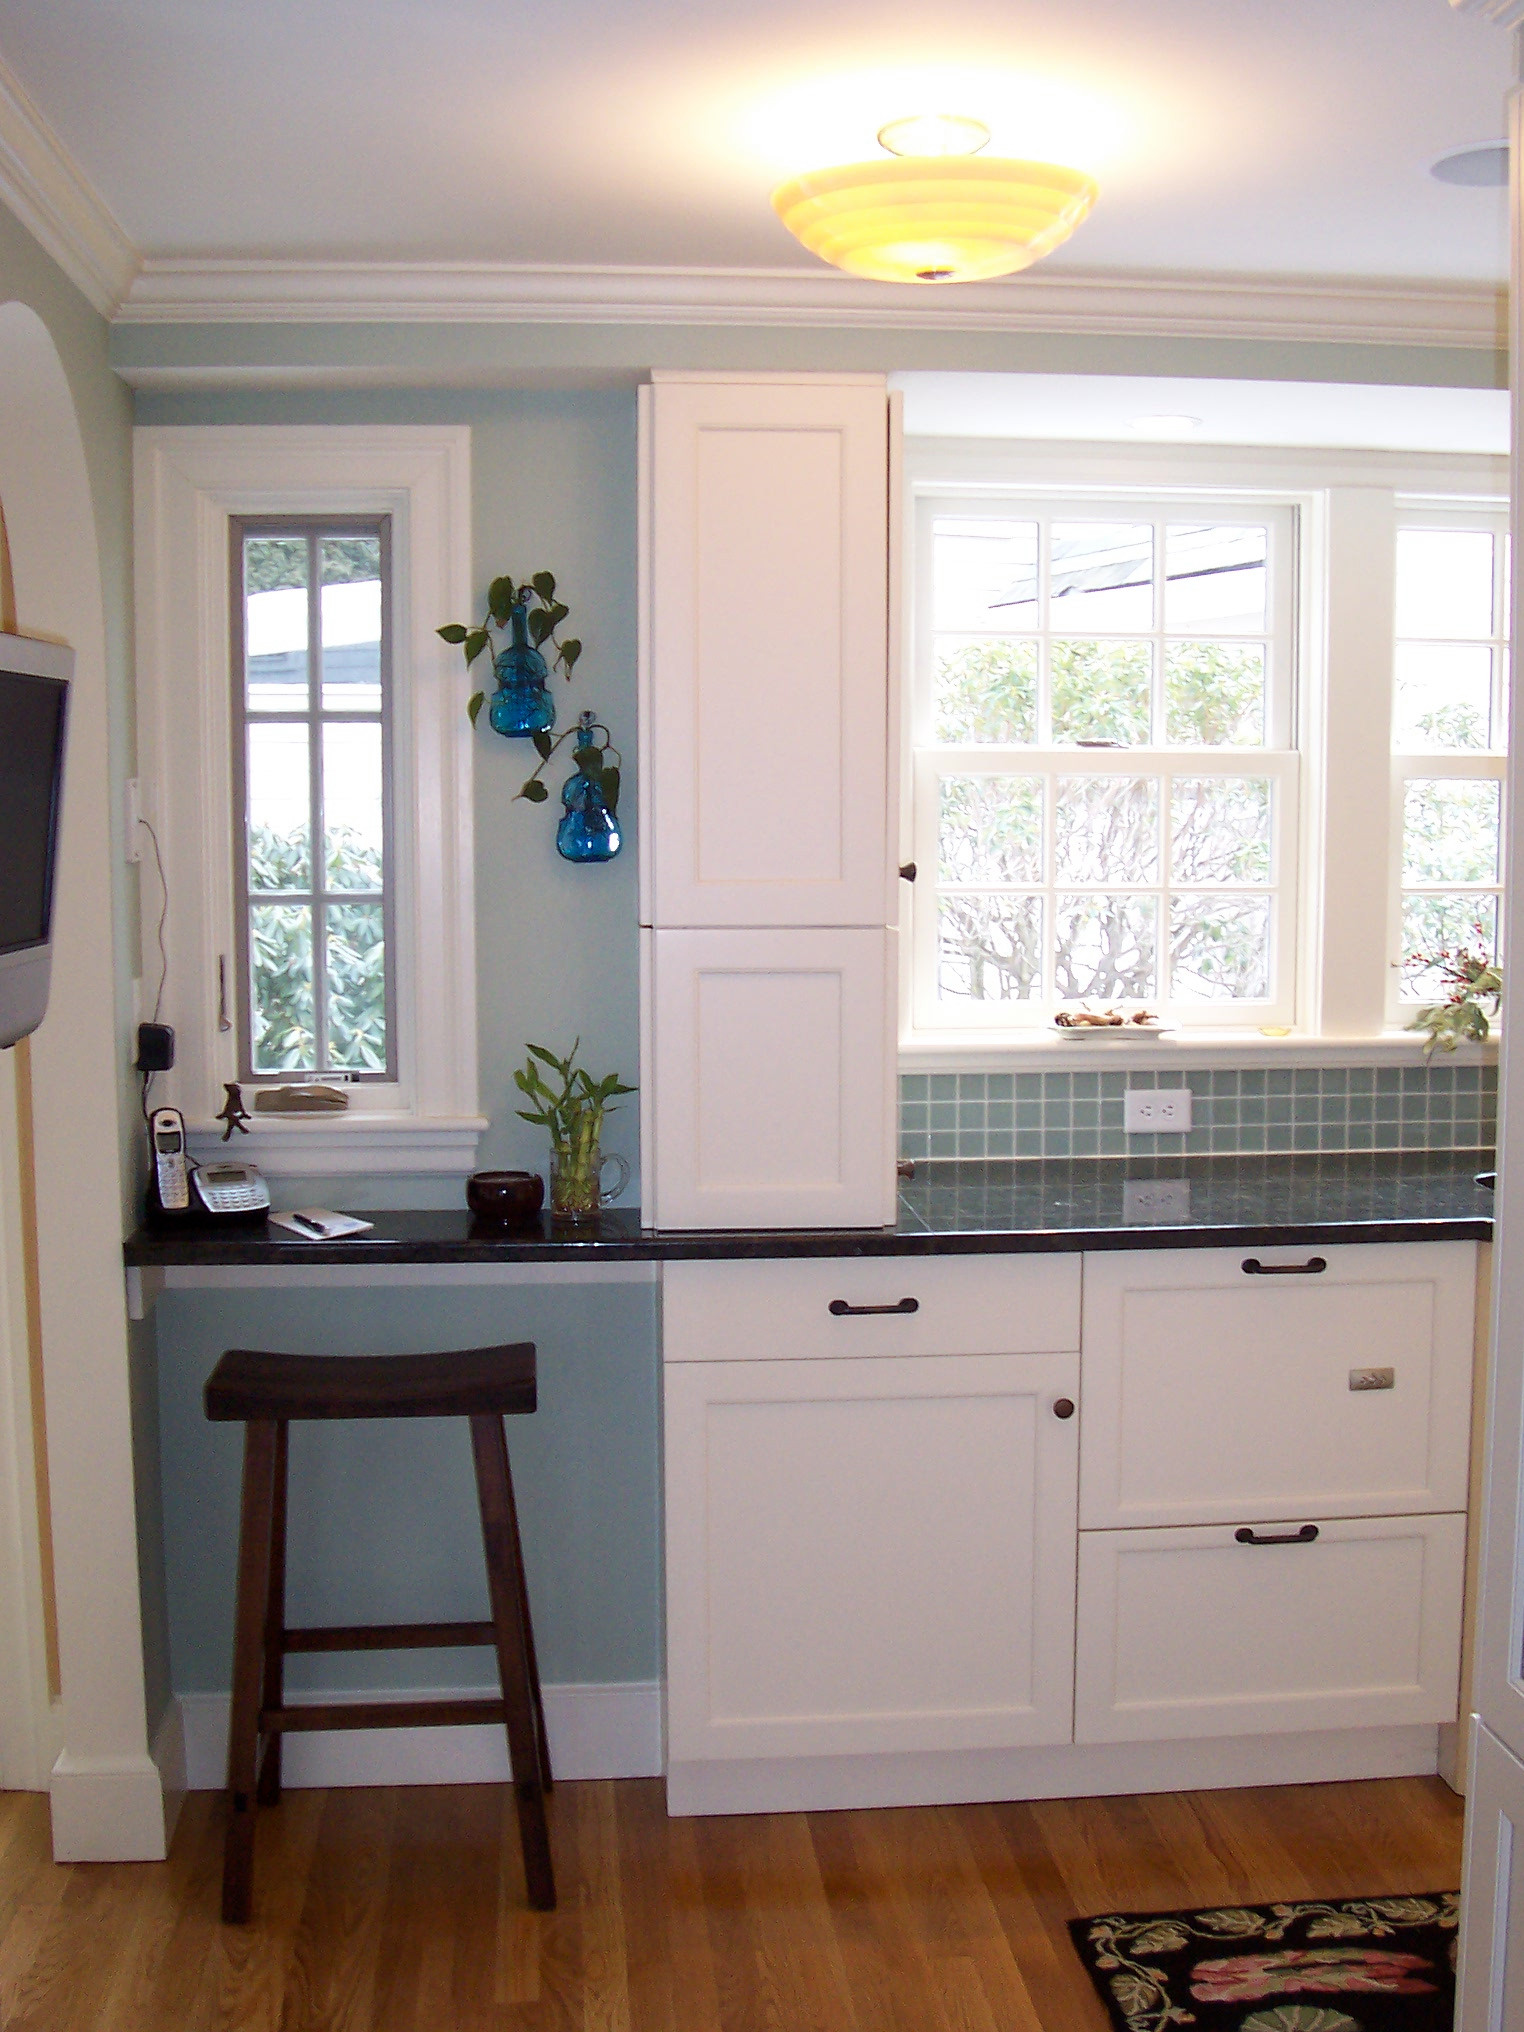 Transforming a Galley Kitchen